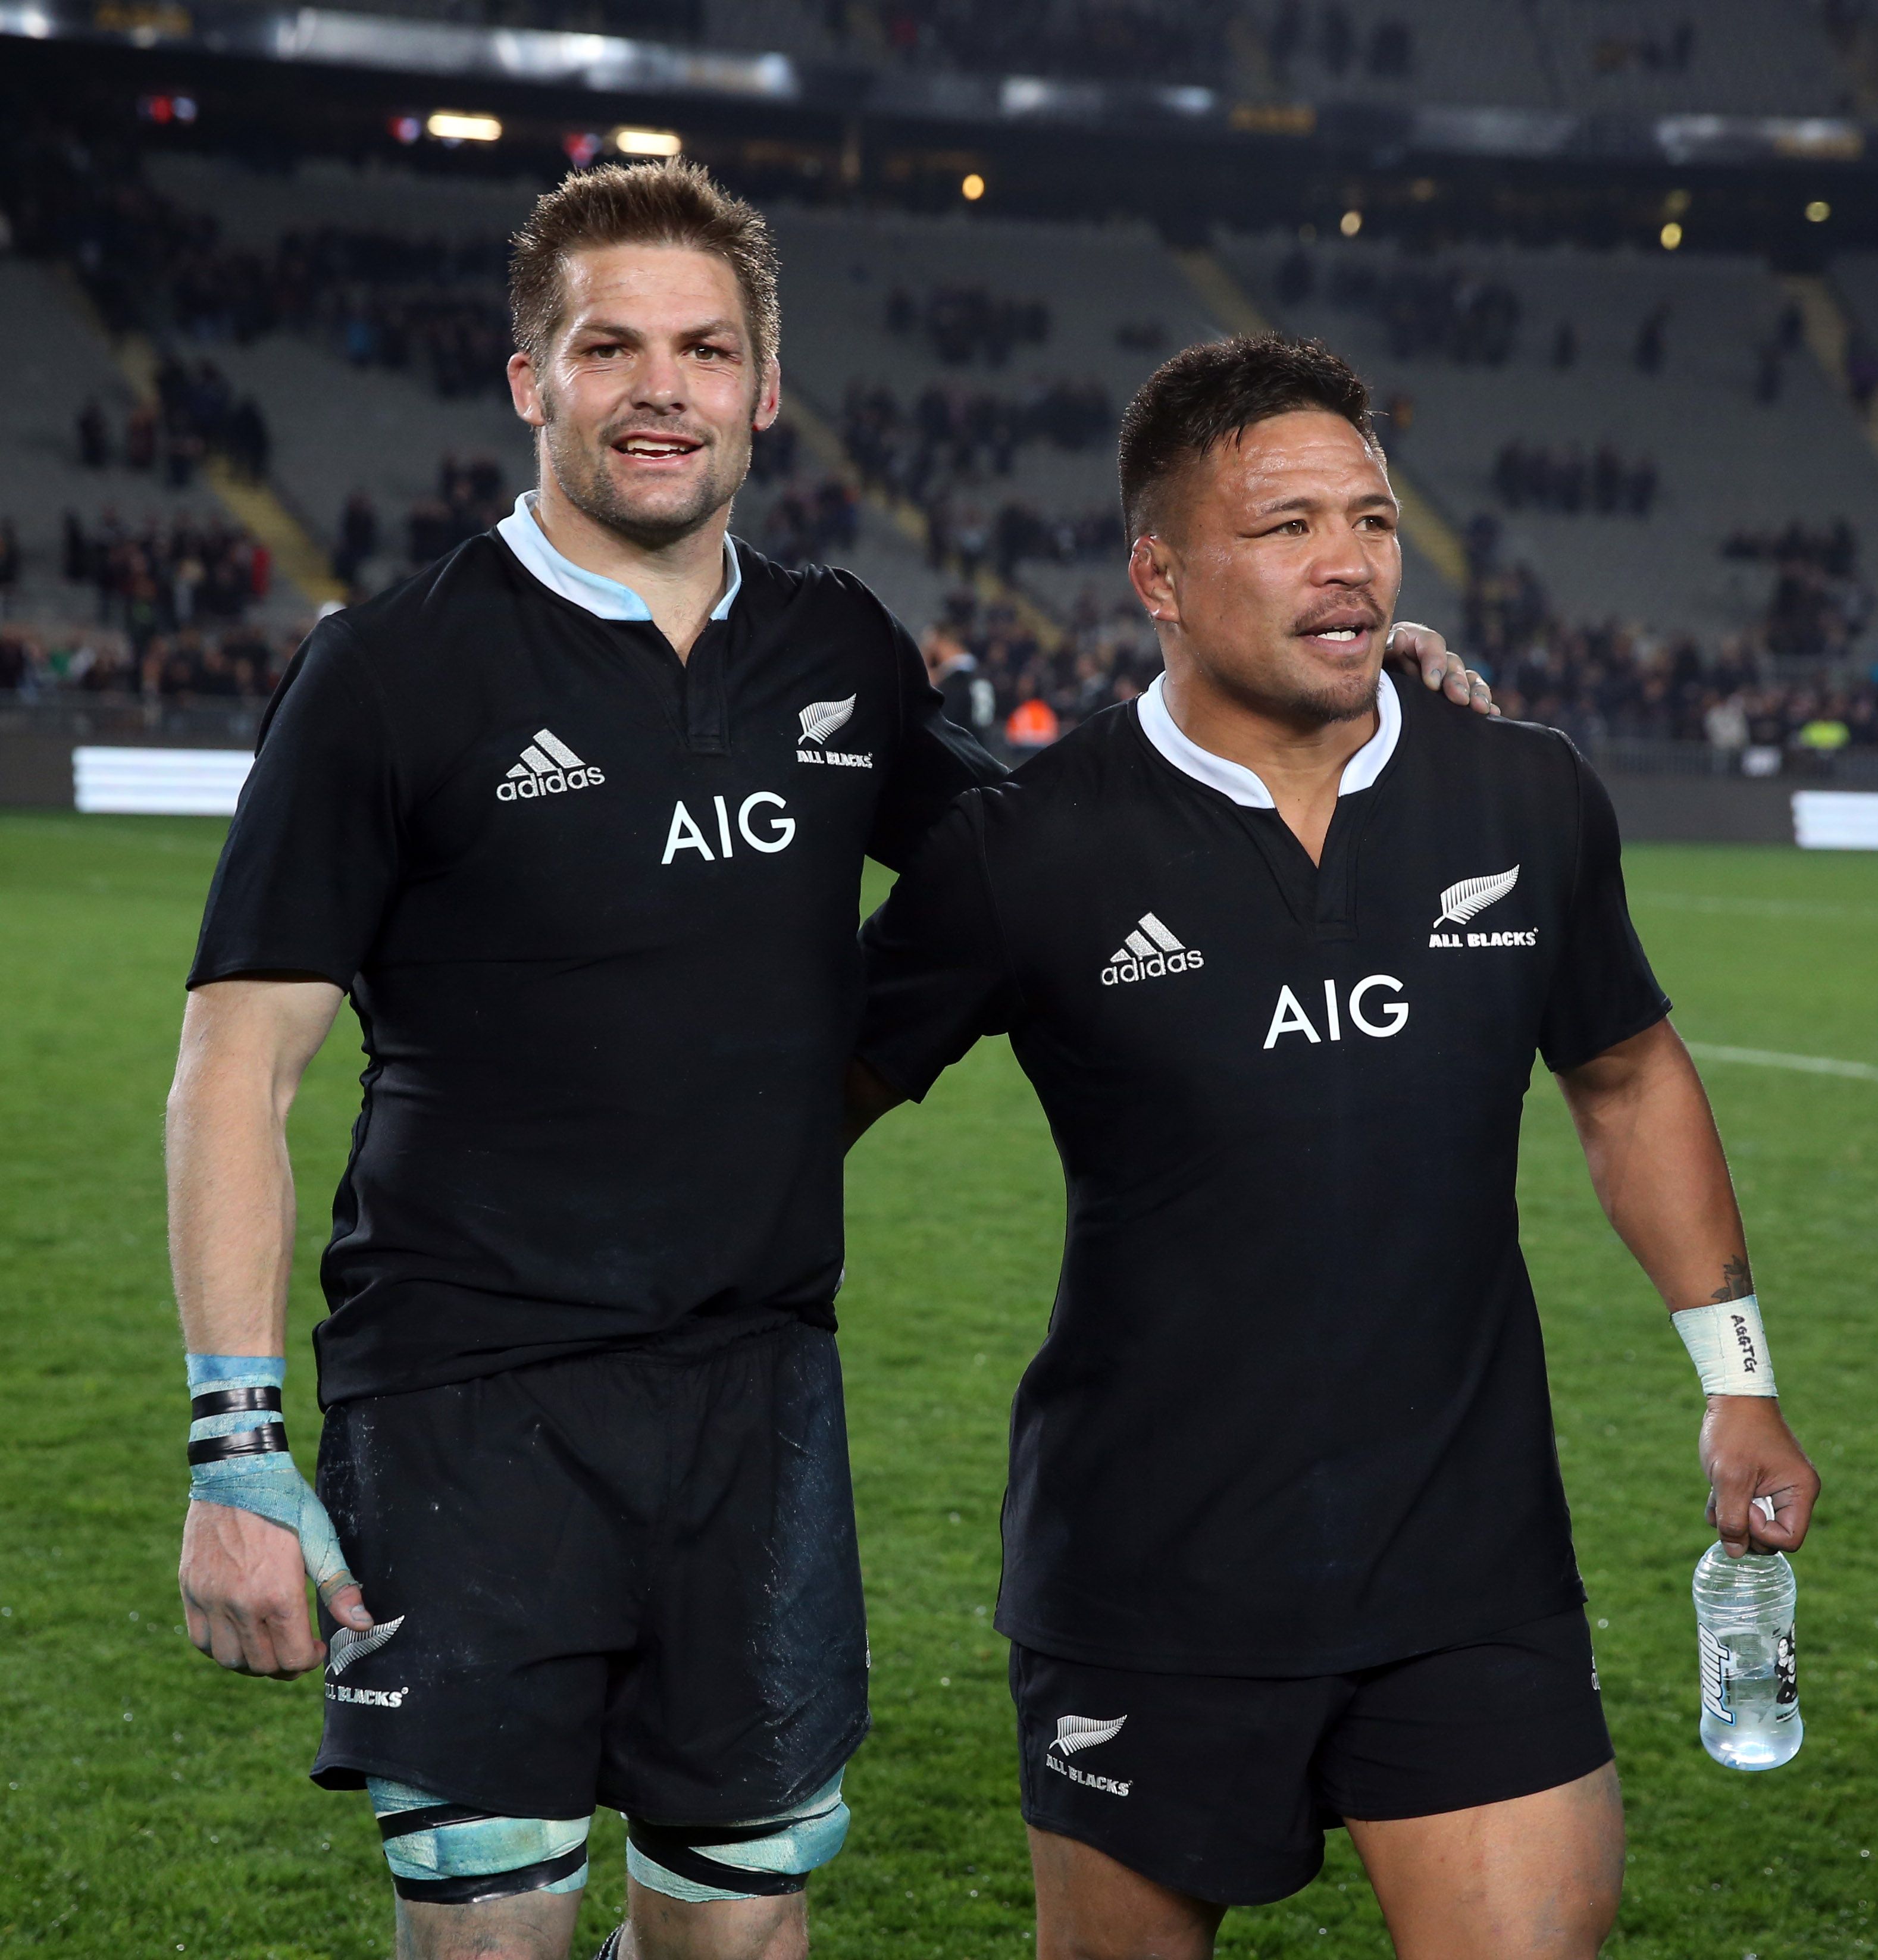 Captain Richie McCaw and hooker Keven Mealamu are expected to retire after this year's World Cup. Photos: AFP